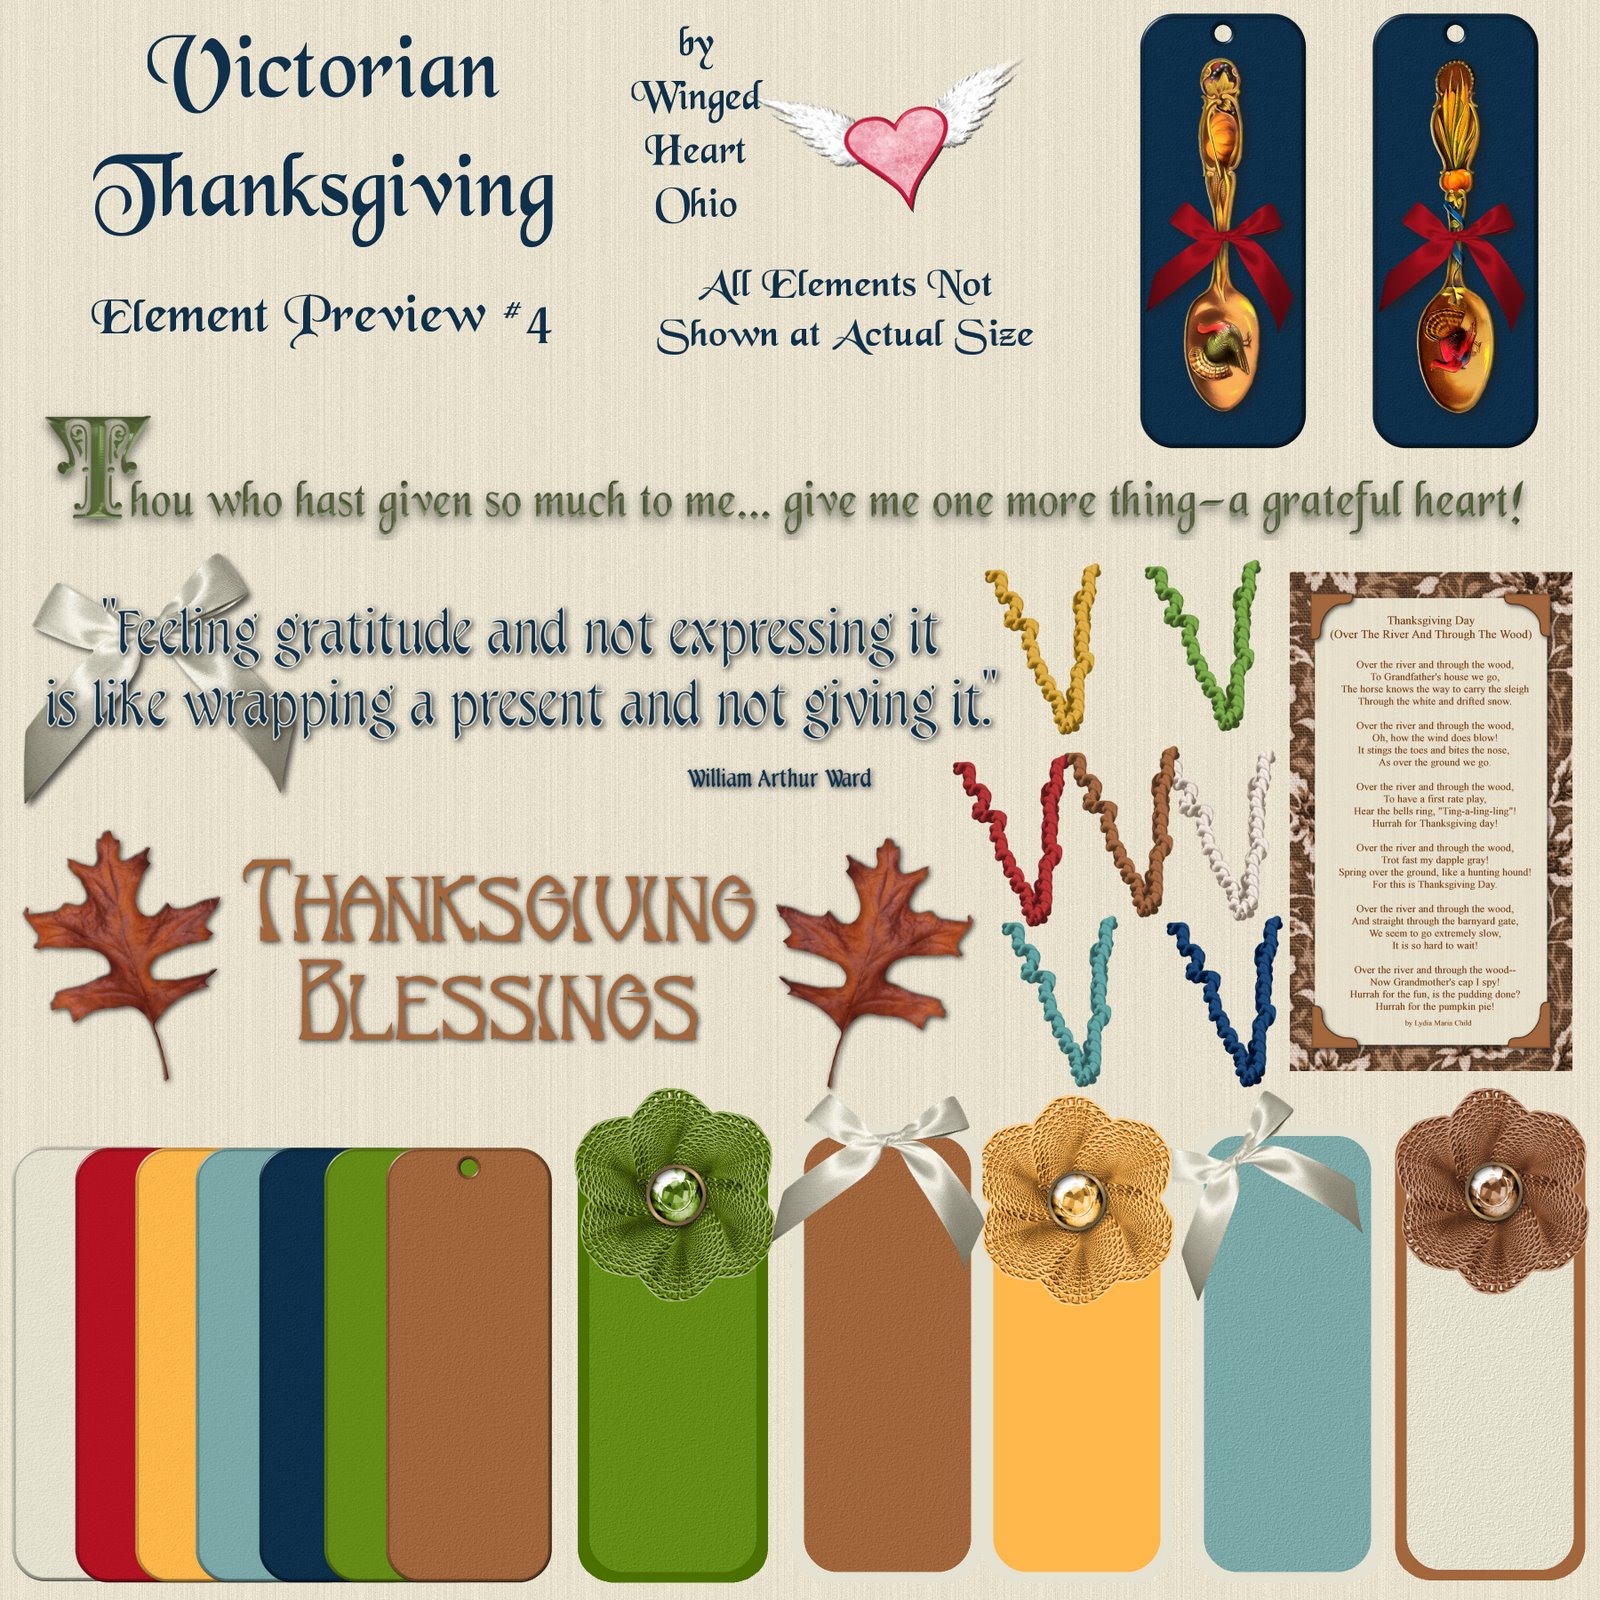 [WH_VictorianThanksgiving_element+preview4.jpg]